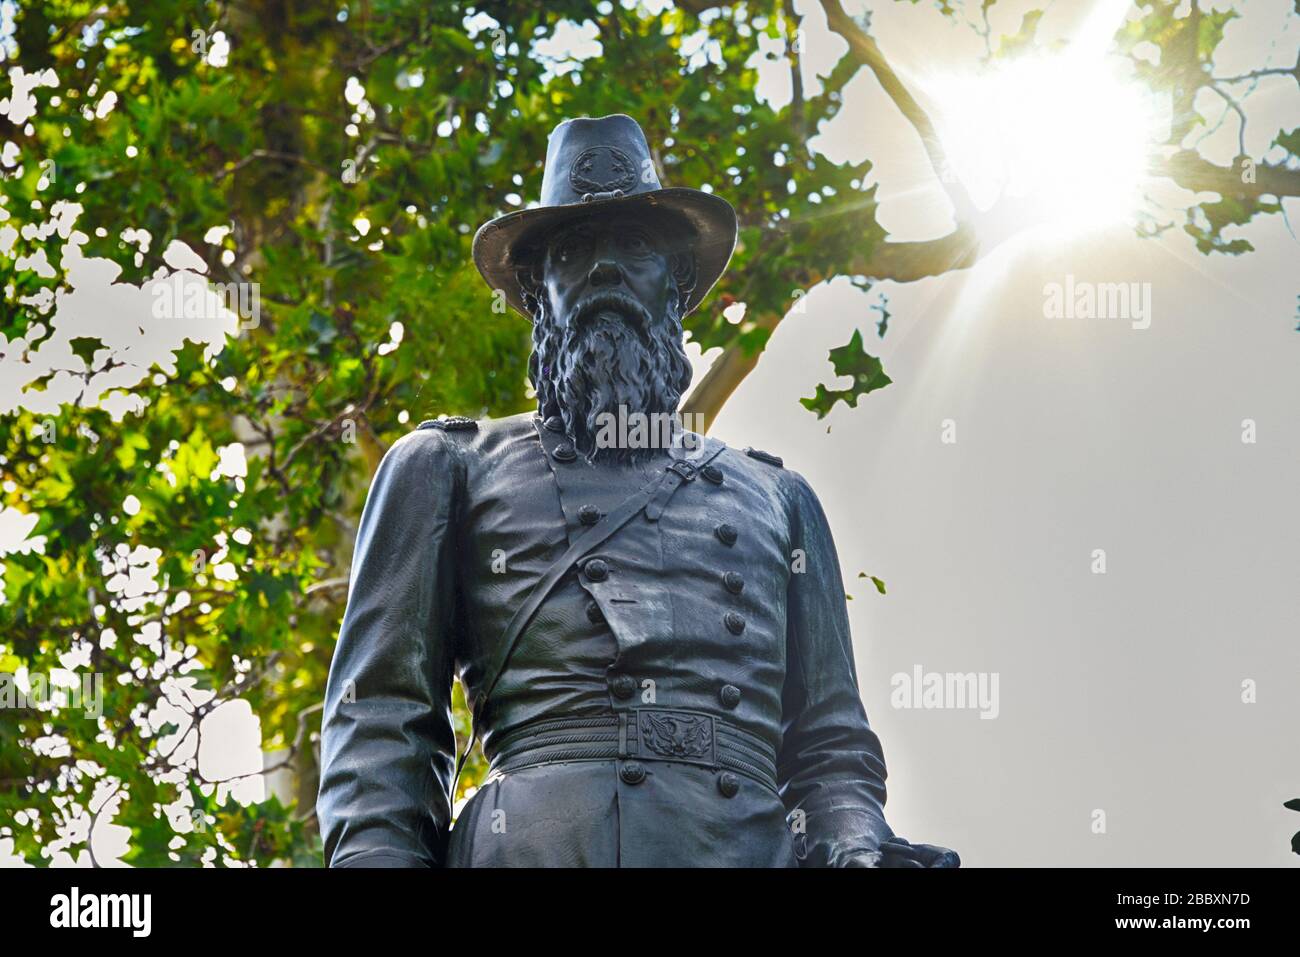 Statue of John Aaron Rawlins, a Union Army general who served during the Civil War and later as Secretary of War. Washington, D.C. Stock Photo